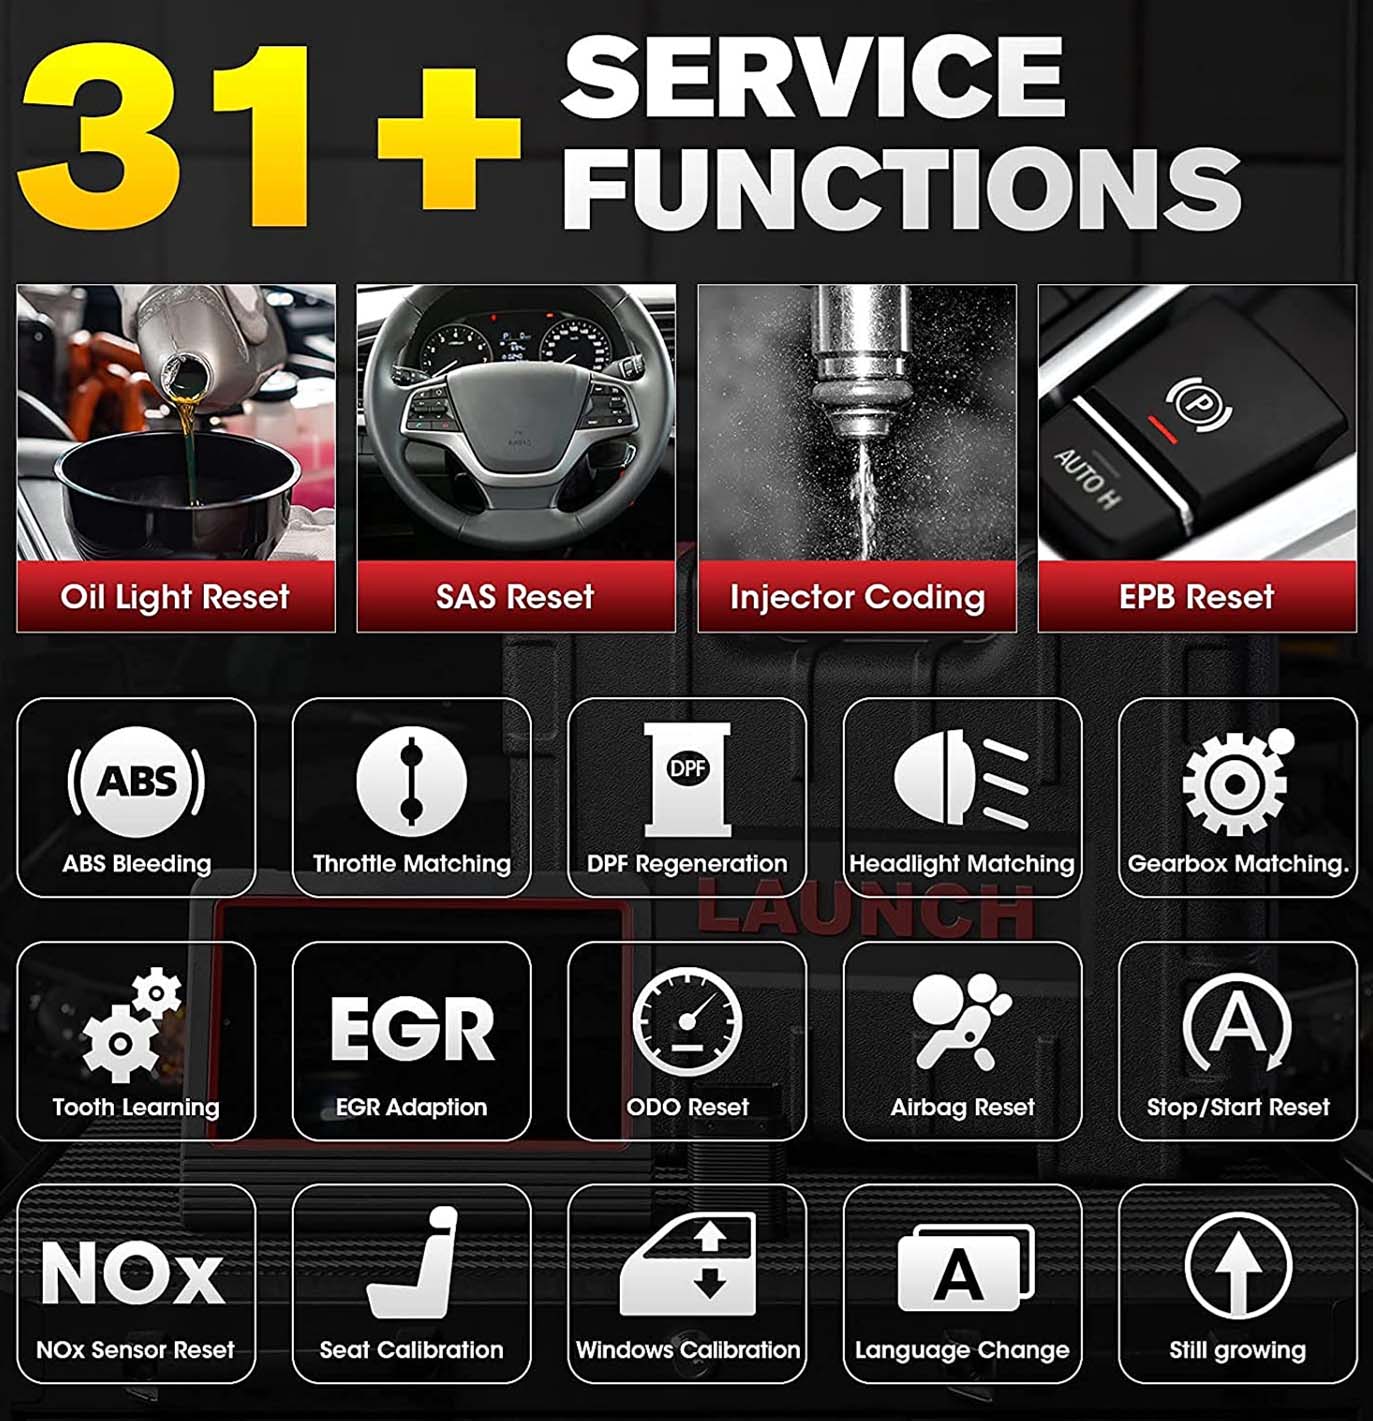 Launch-X431-PROS-OE-Level-Full-System-Diagnostic-Tool-Support-Guided-Functions-with-2-Years-Free-Update-SP373